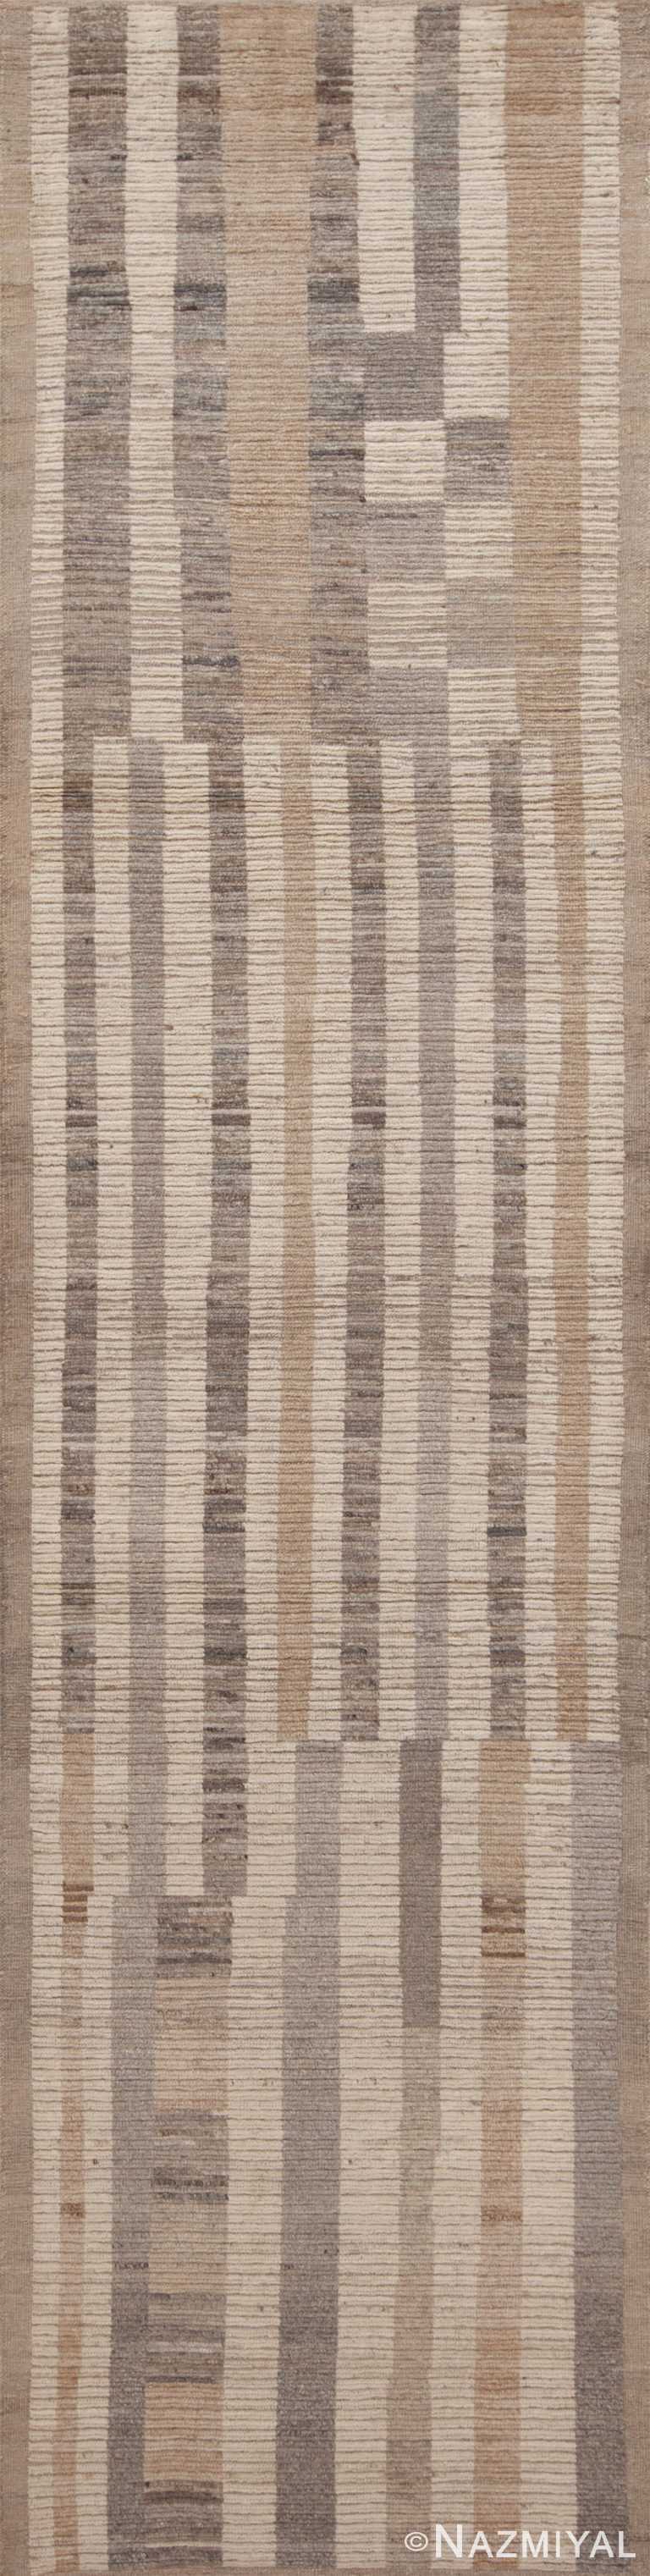 Decorative Light Cream Color Background and Neutral Color Tribal Geometric Design Modern Hallway Runner Rug 11147 by Nazmiyal Antique Rugs